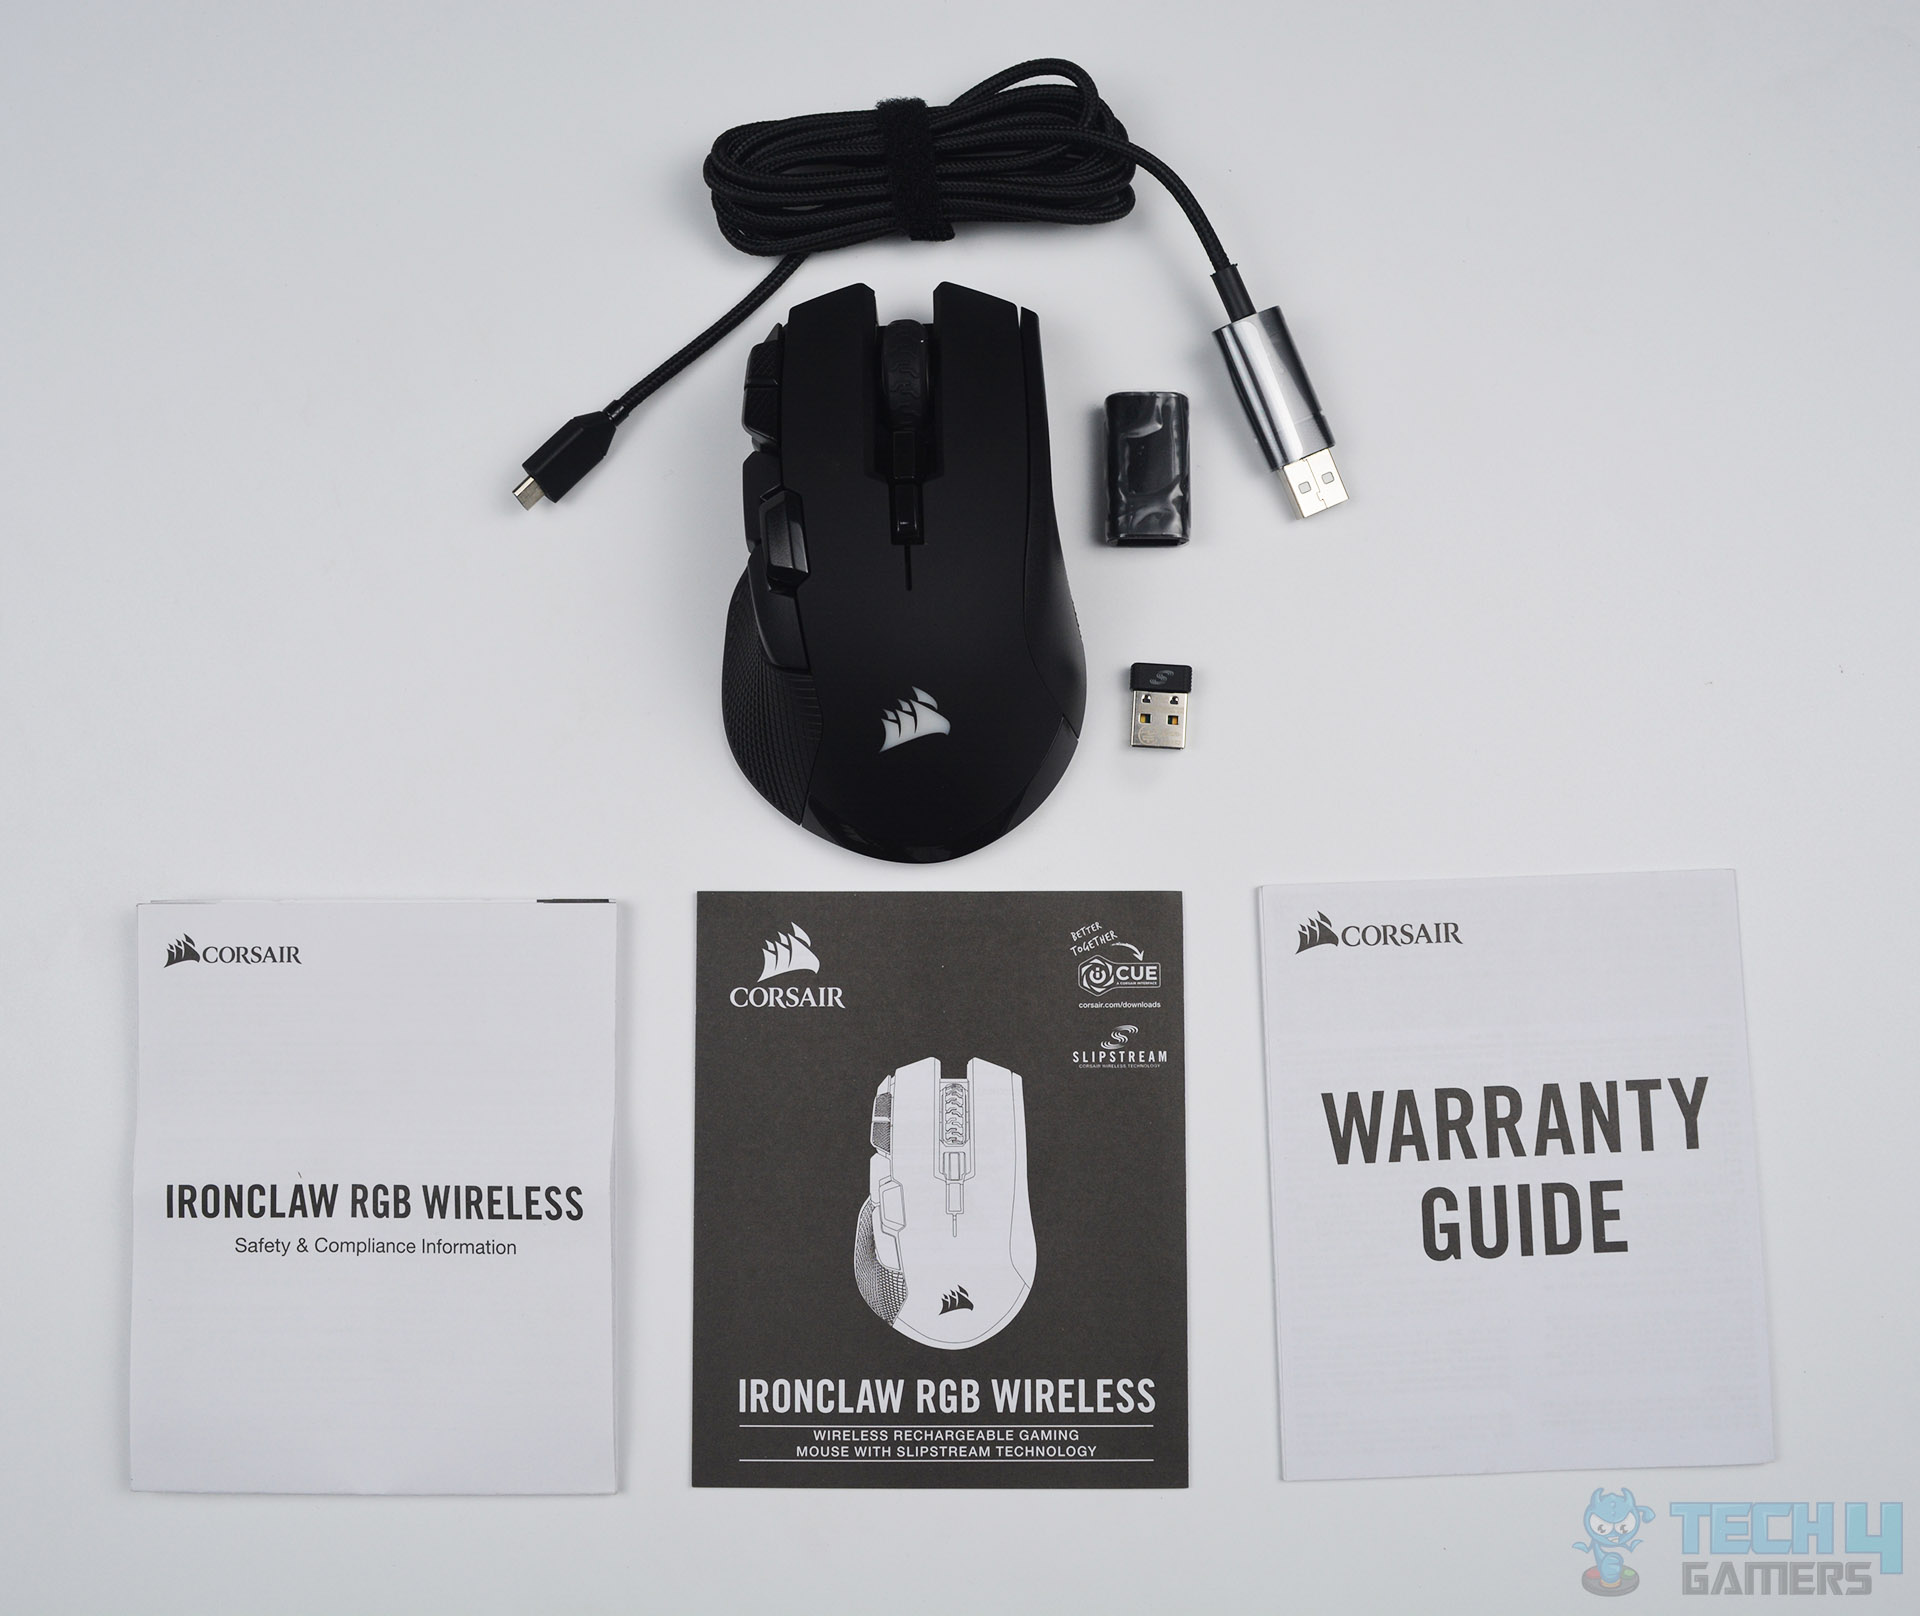 Corsair Ironclaw RGB Wireless - Box Contents